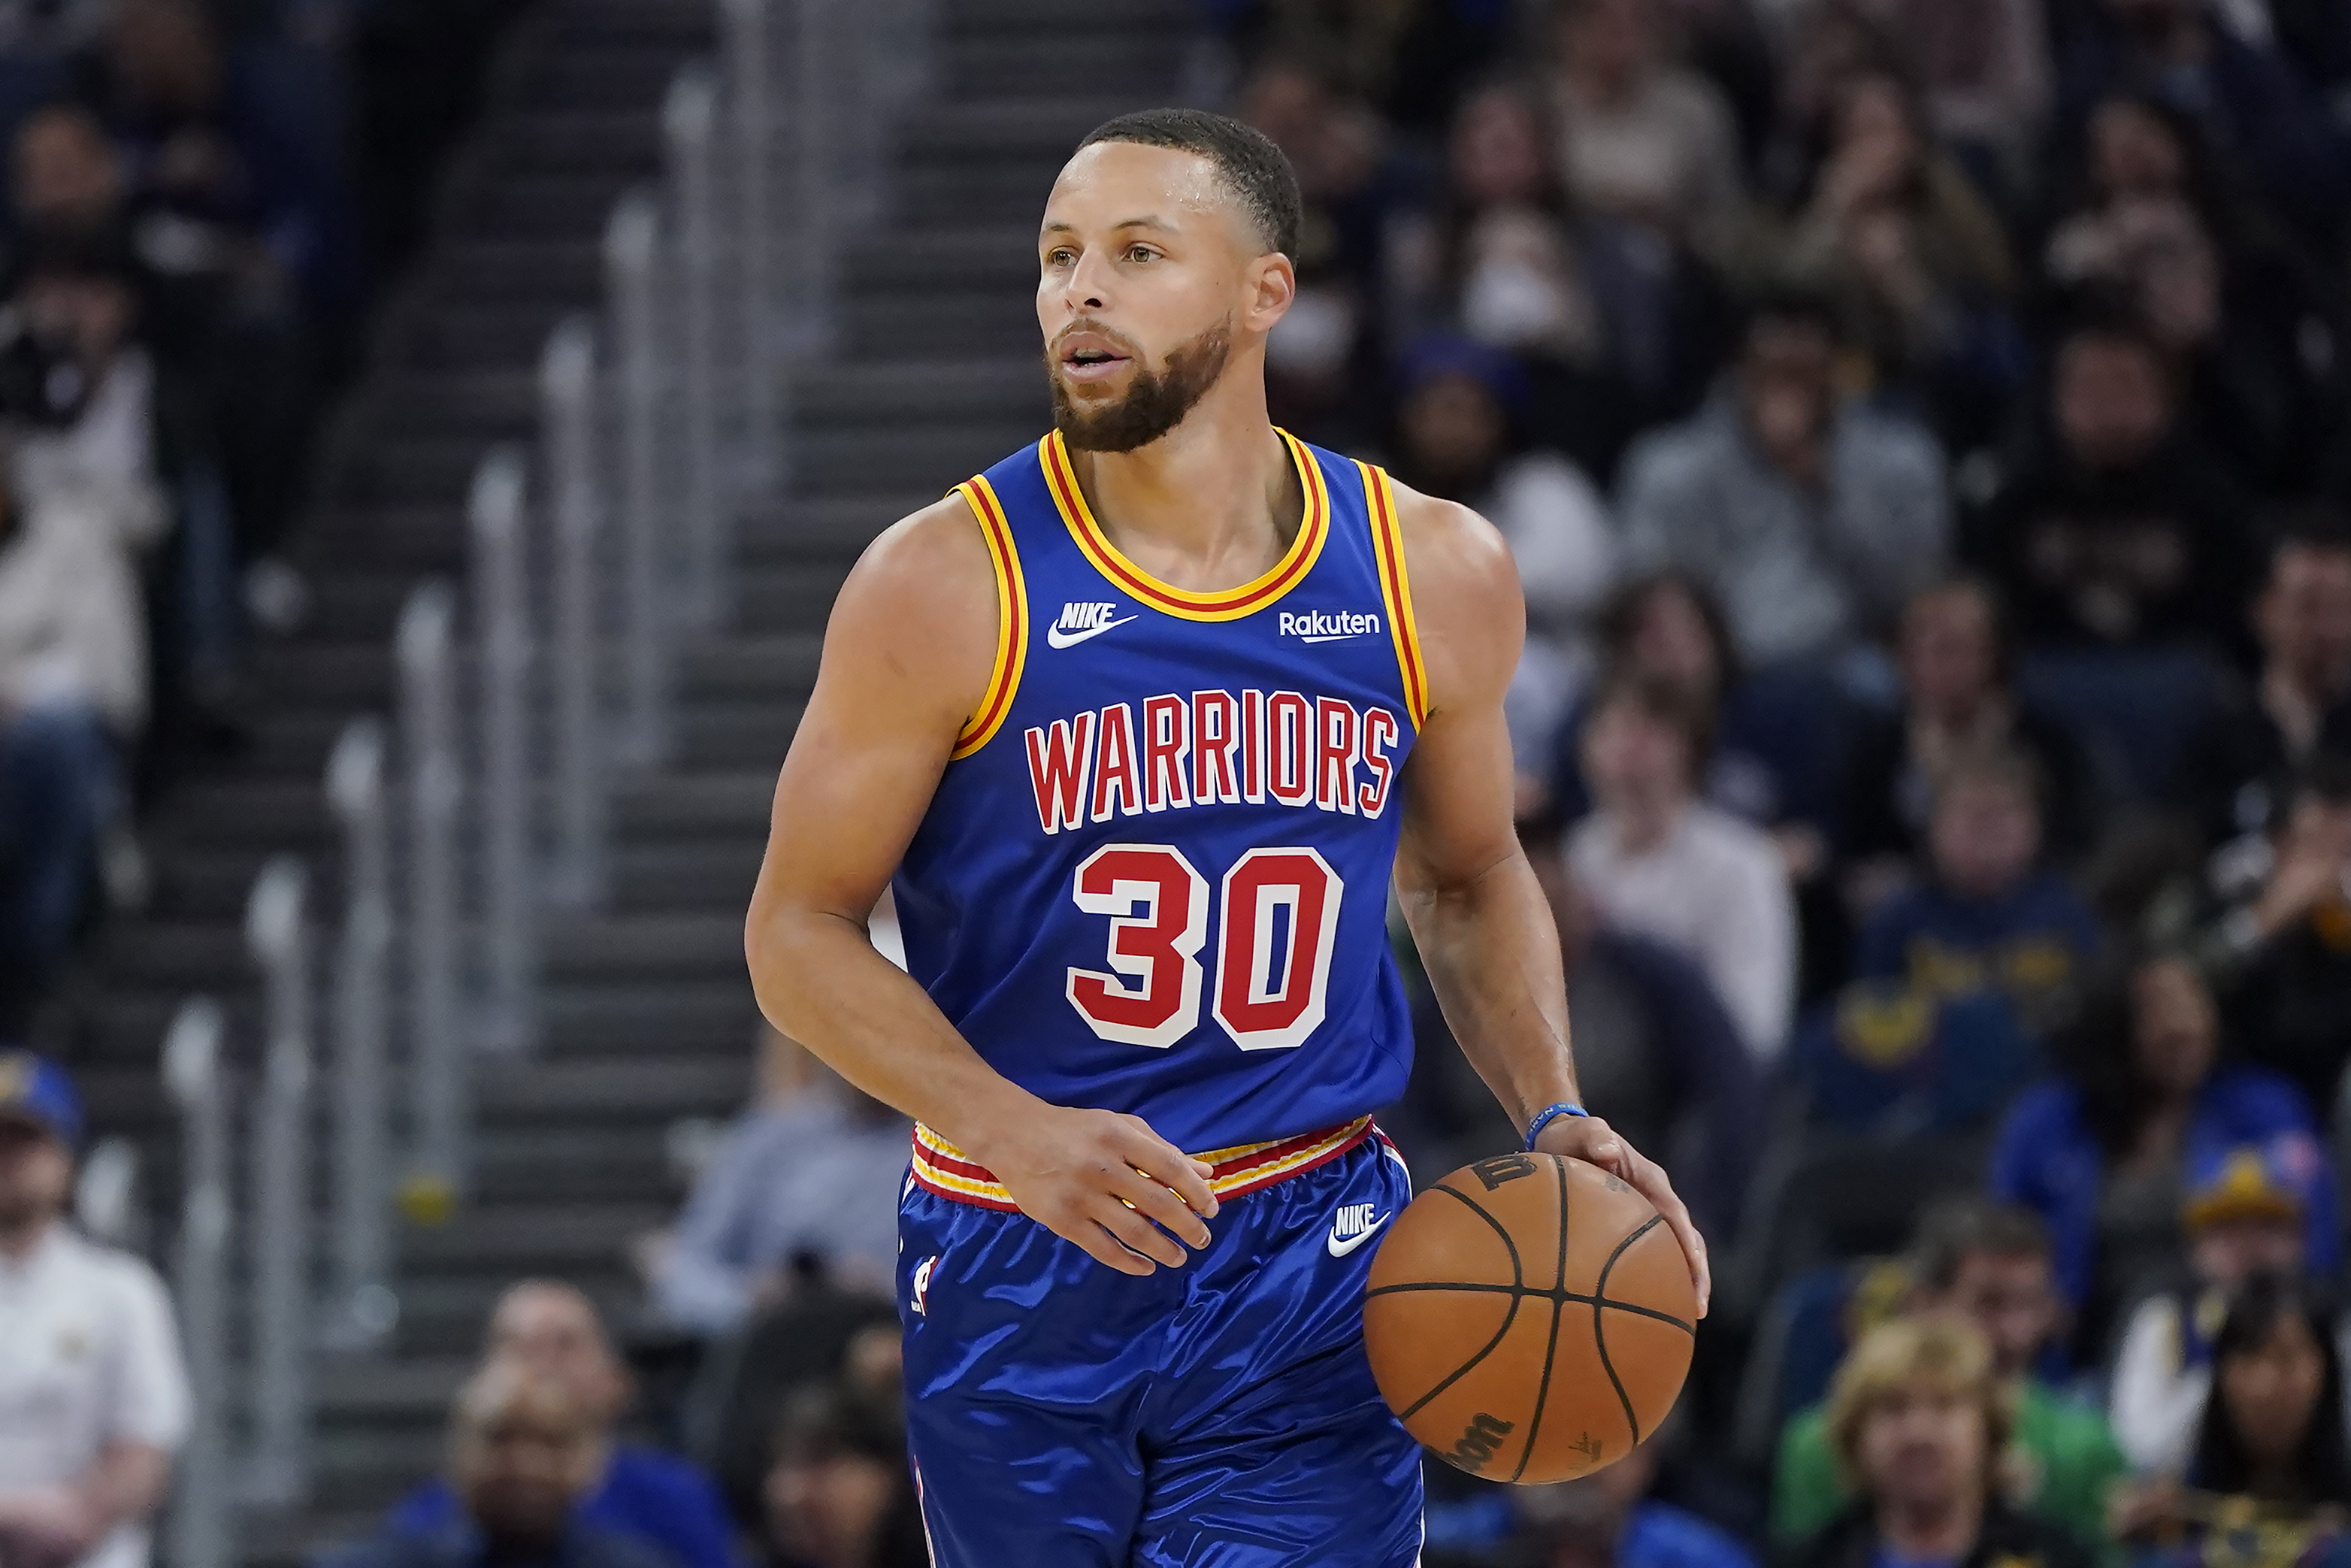 Warriors' Stephen Curry Reportedly out Indefinitely After Suffering Foot Injury